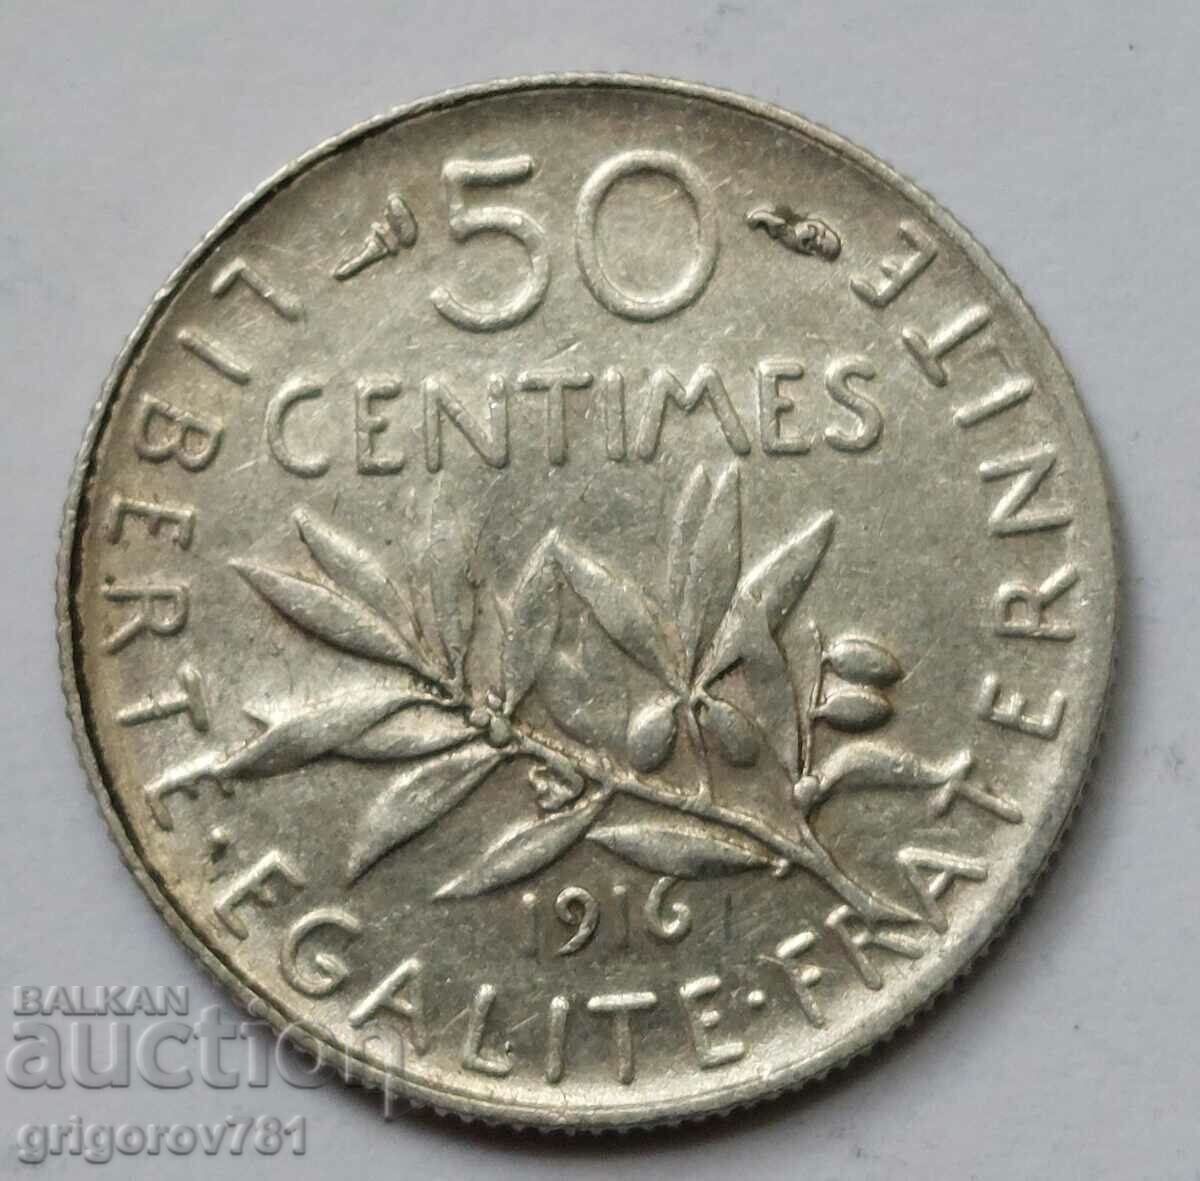 50 centimes silver France 1916 - silver coin №3